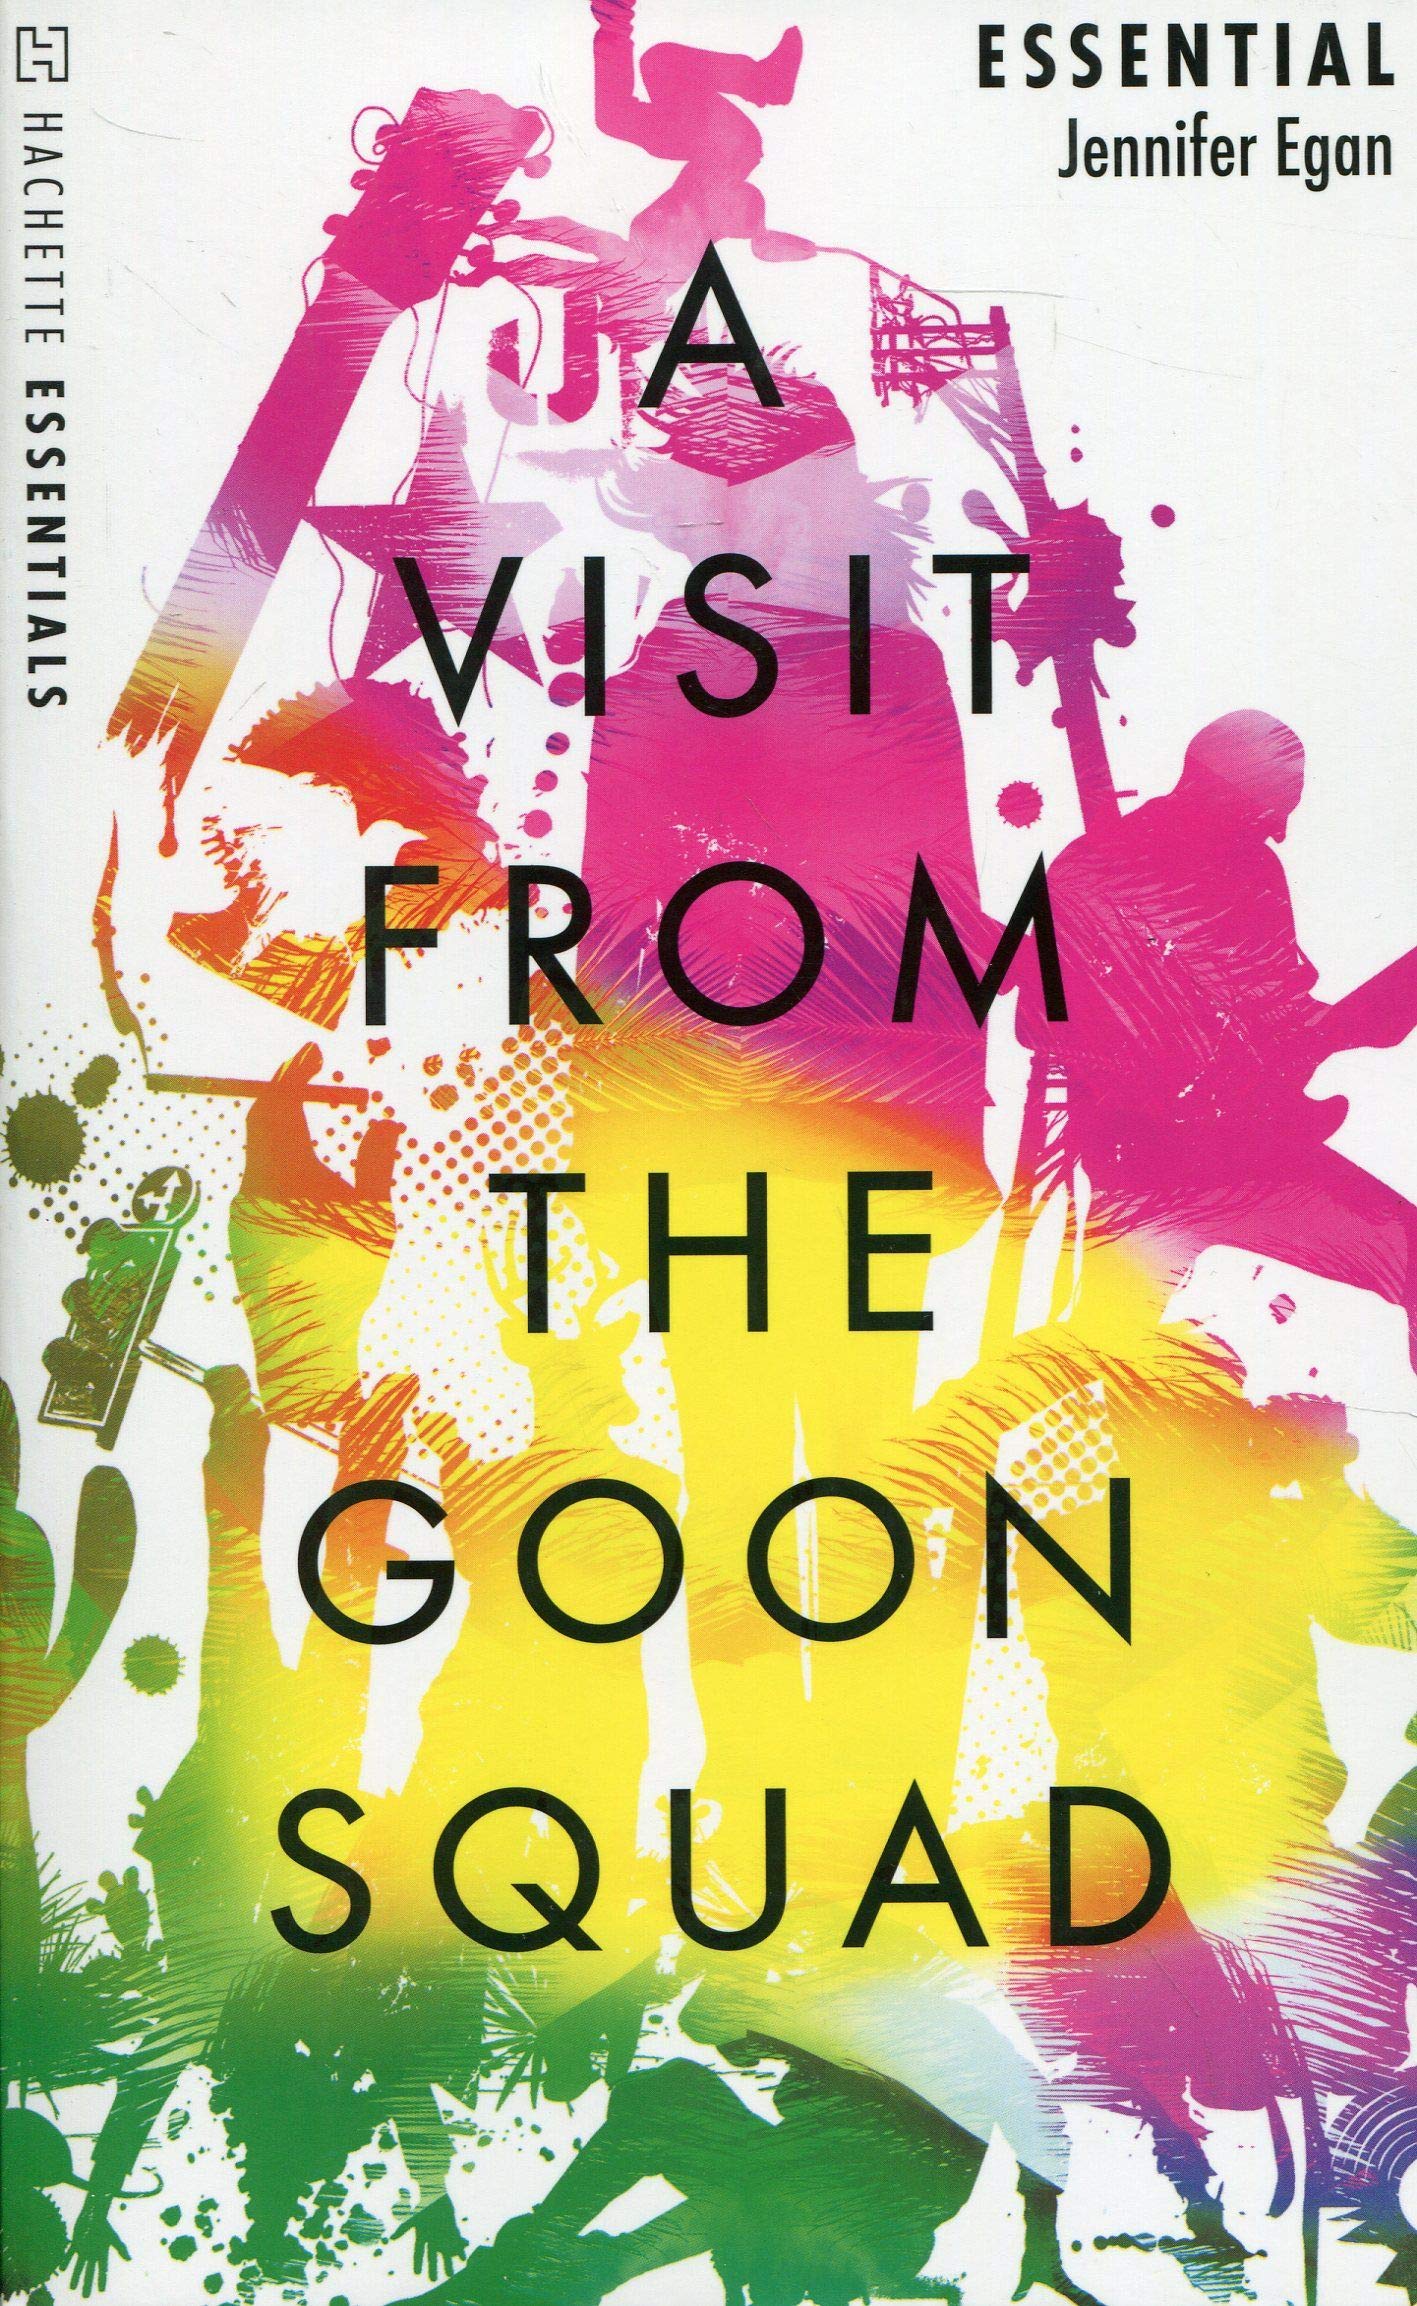 review a visit from the goon squad